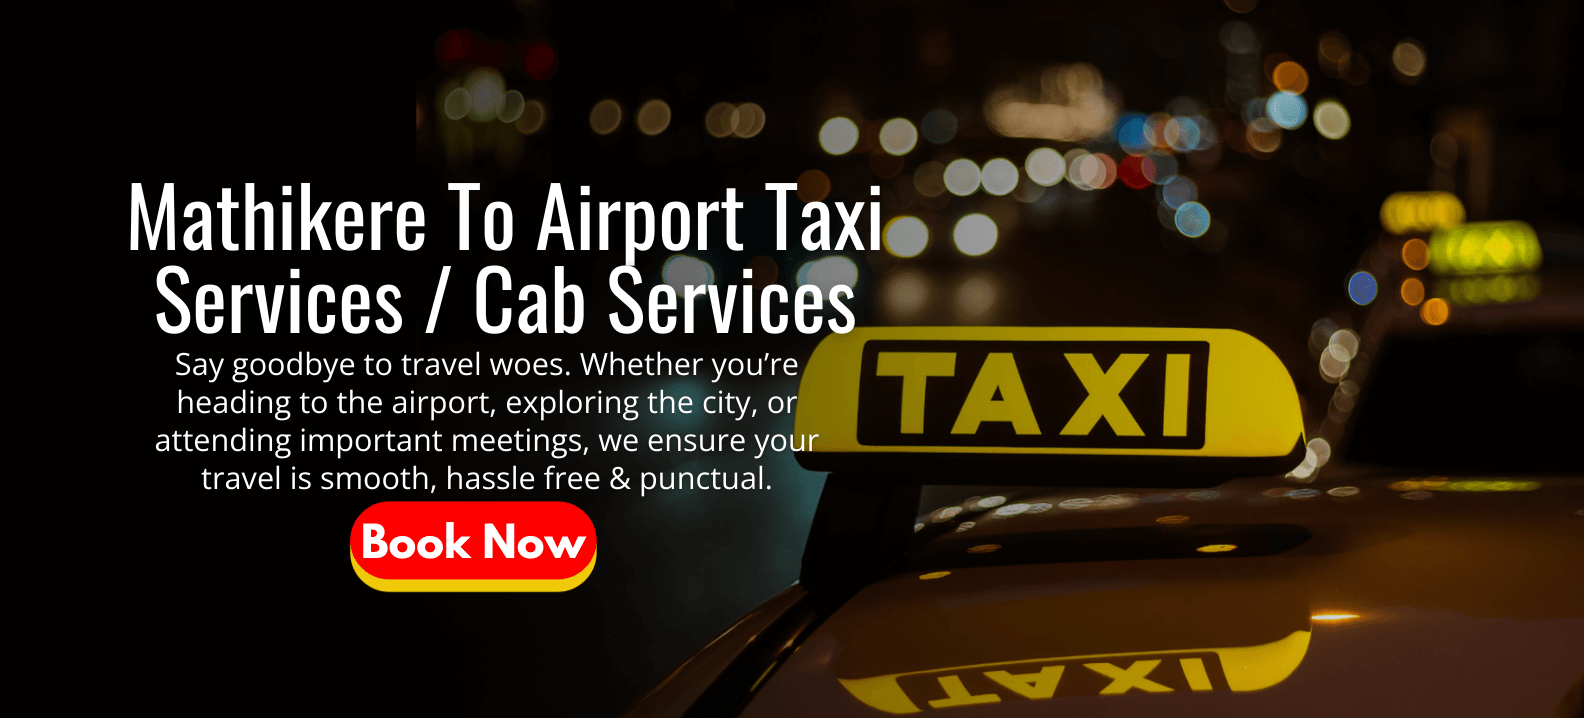 Mathikere to Airport Taxi Services | Cab Services